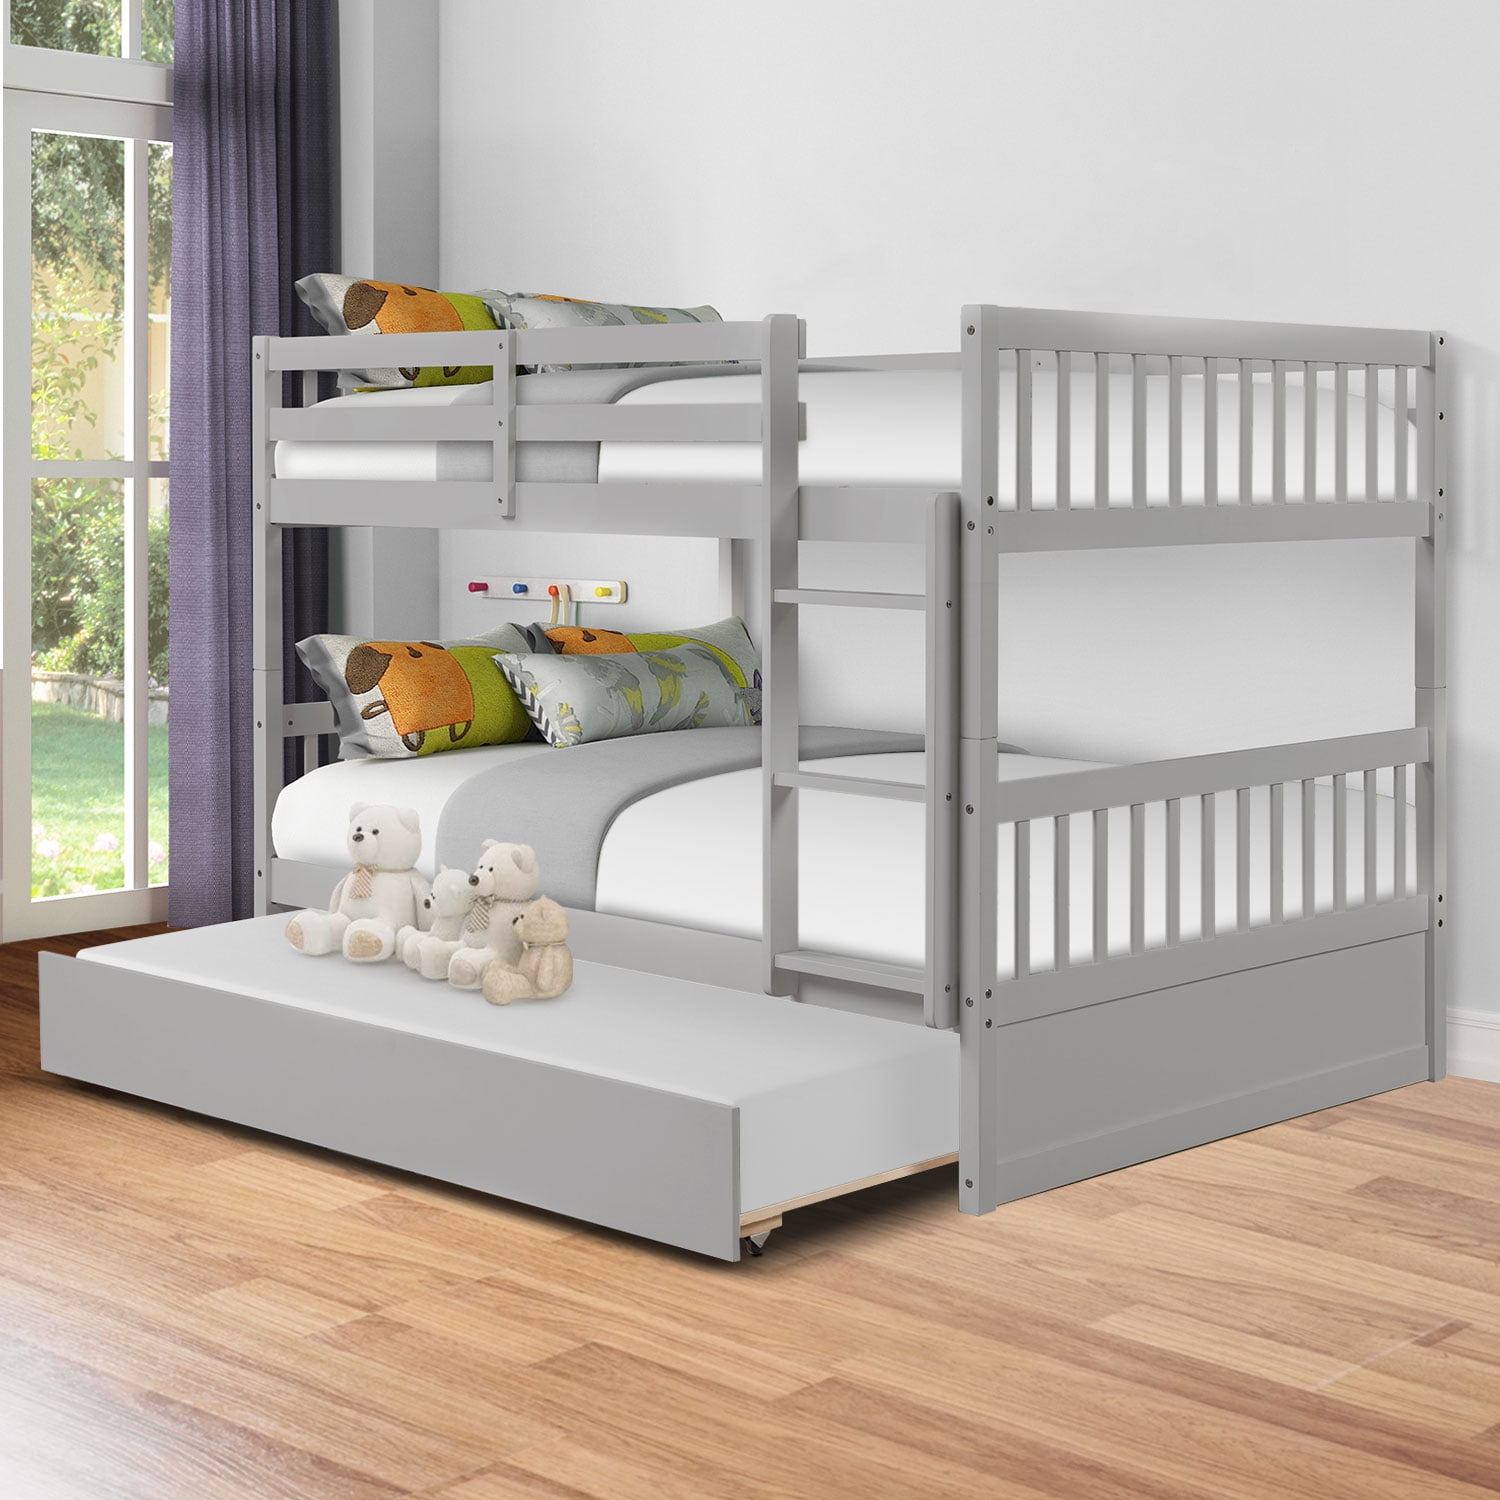 Trundle Sweden Pine Wood Bunk Beds, Bunk Bed With Pull Out